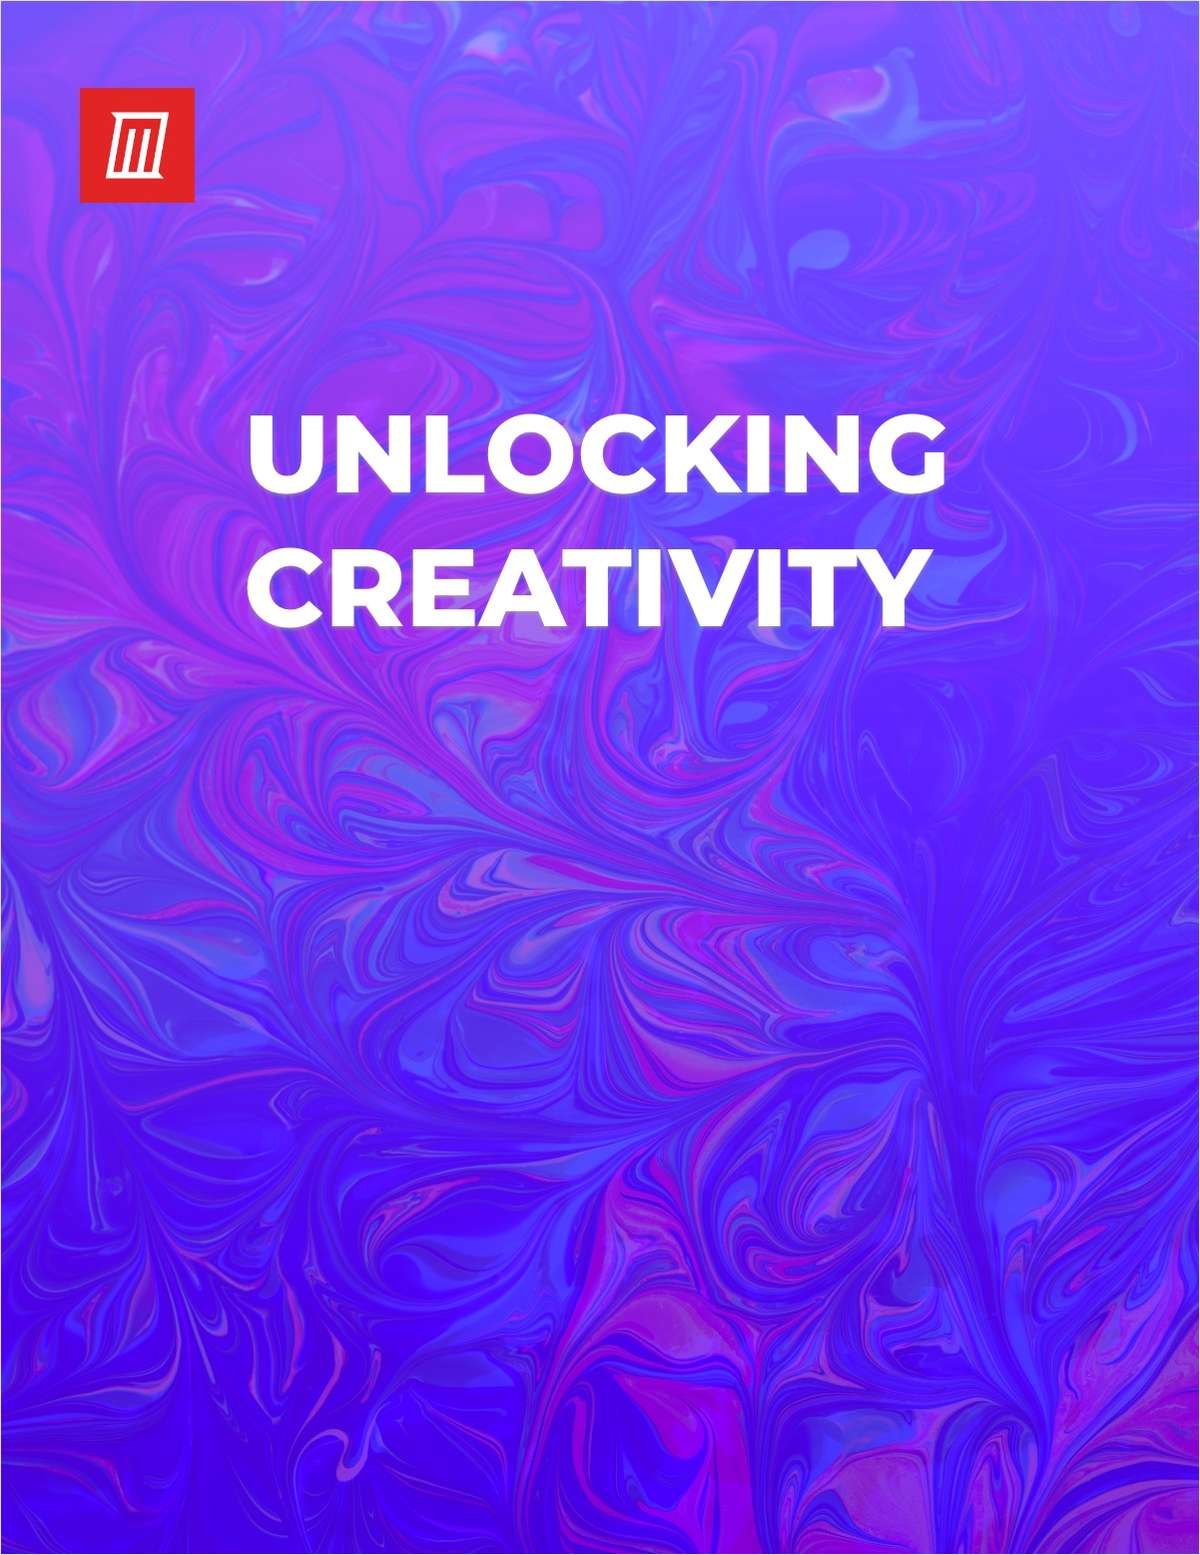 Simple Tips to Unlock Your Creativity